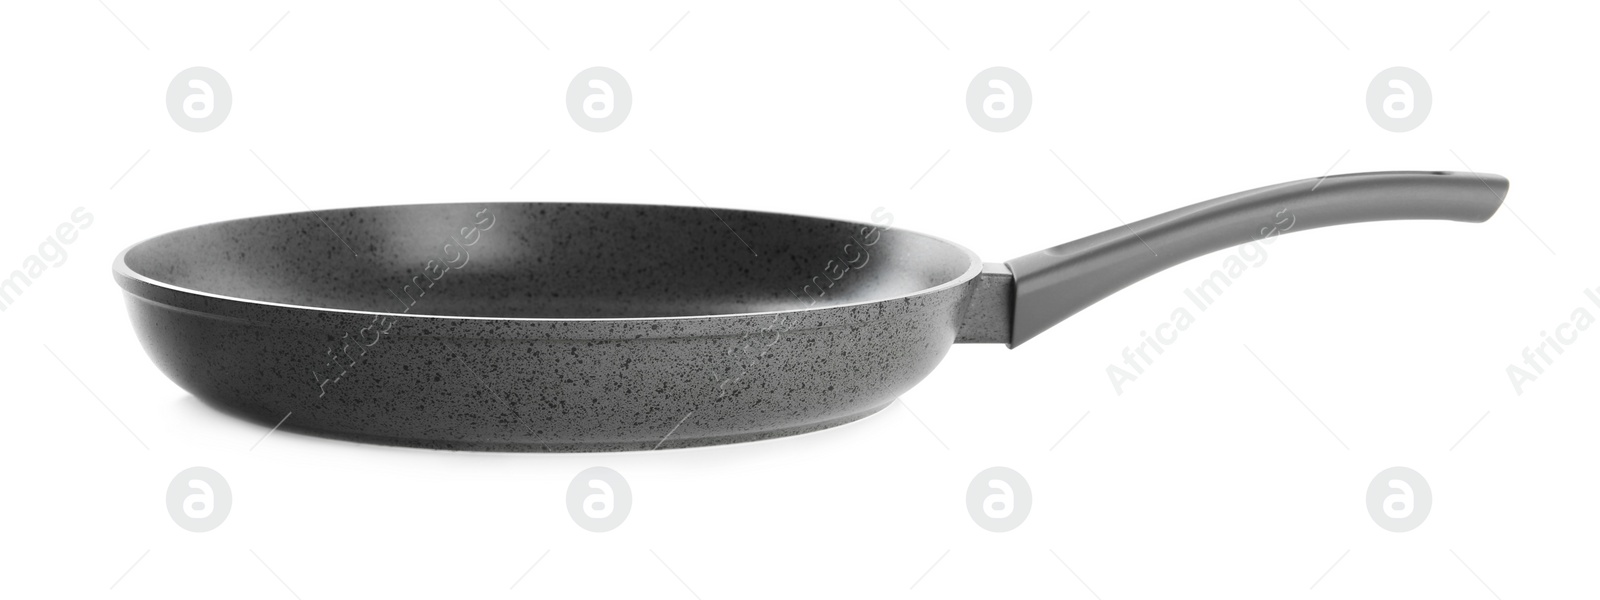 Photo of New frying pan isolated on white. Cooking utensil